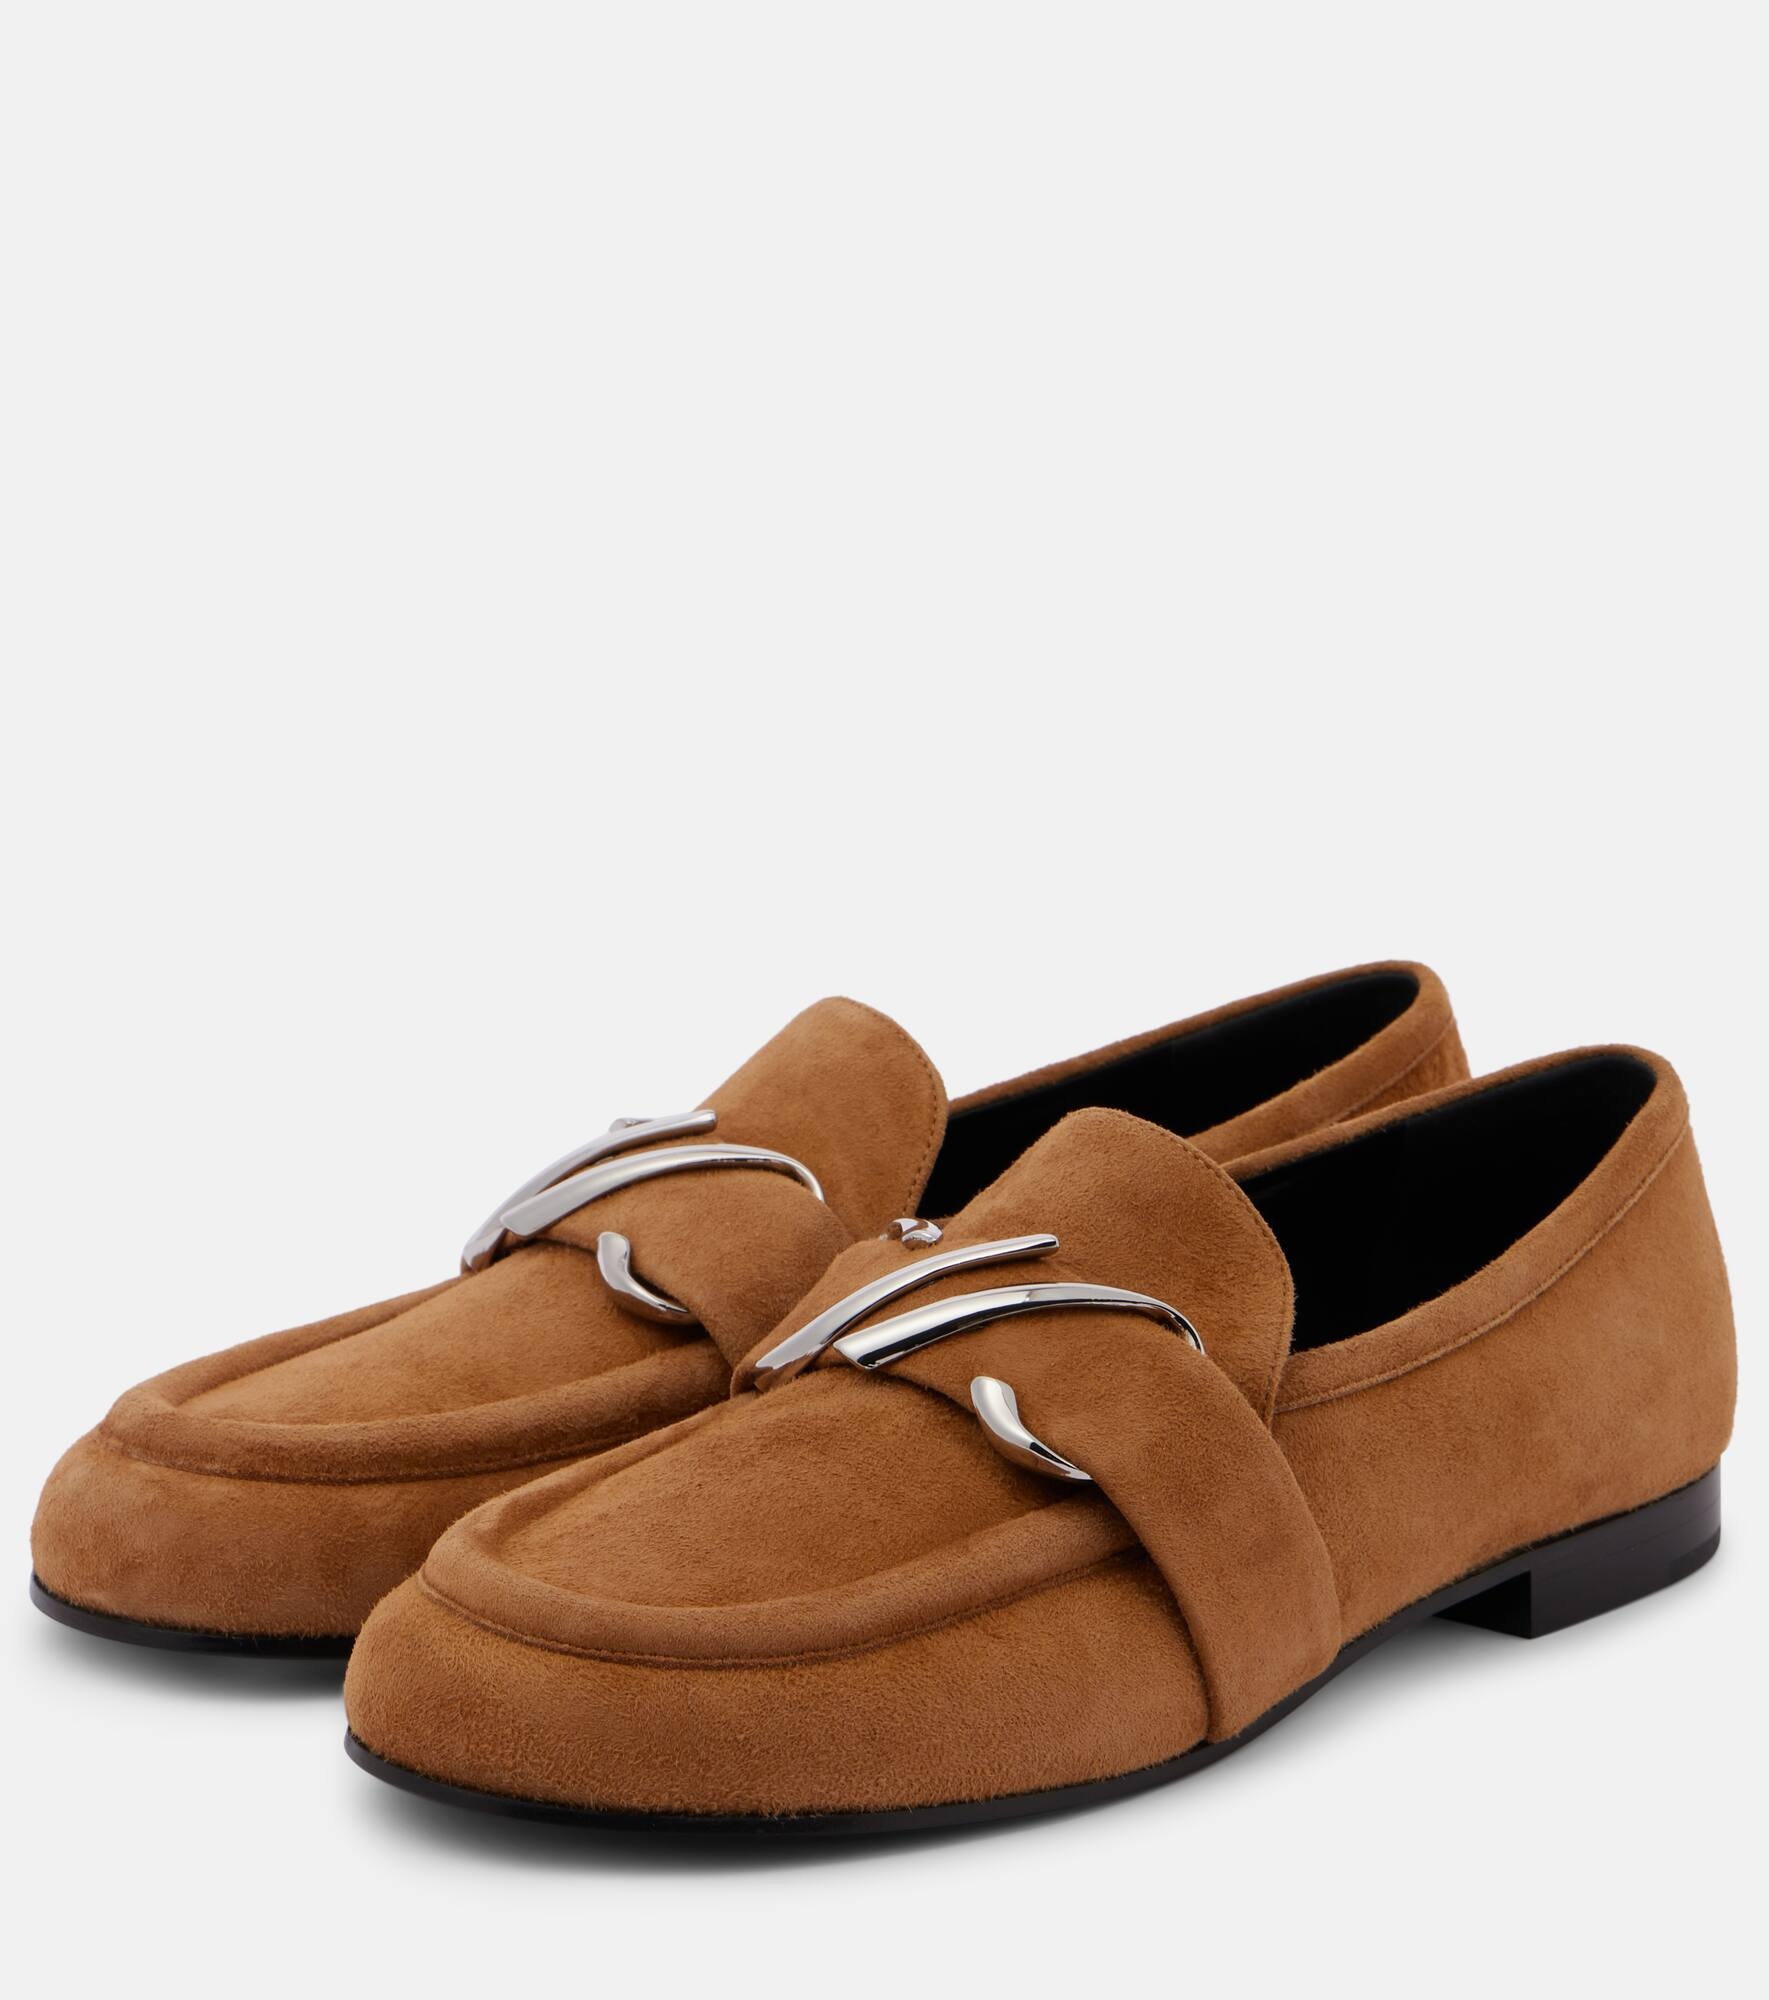 Monogram suede loafers - 5